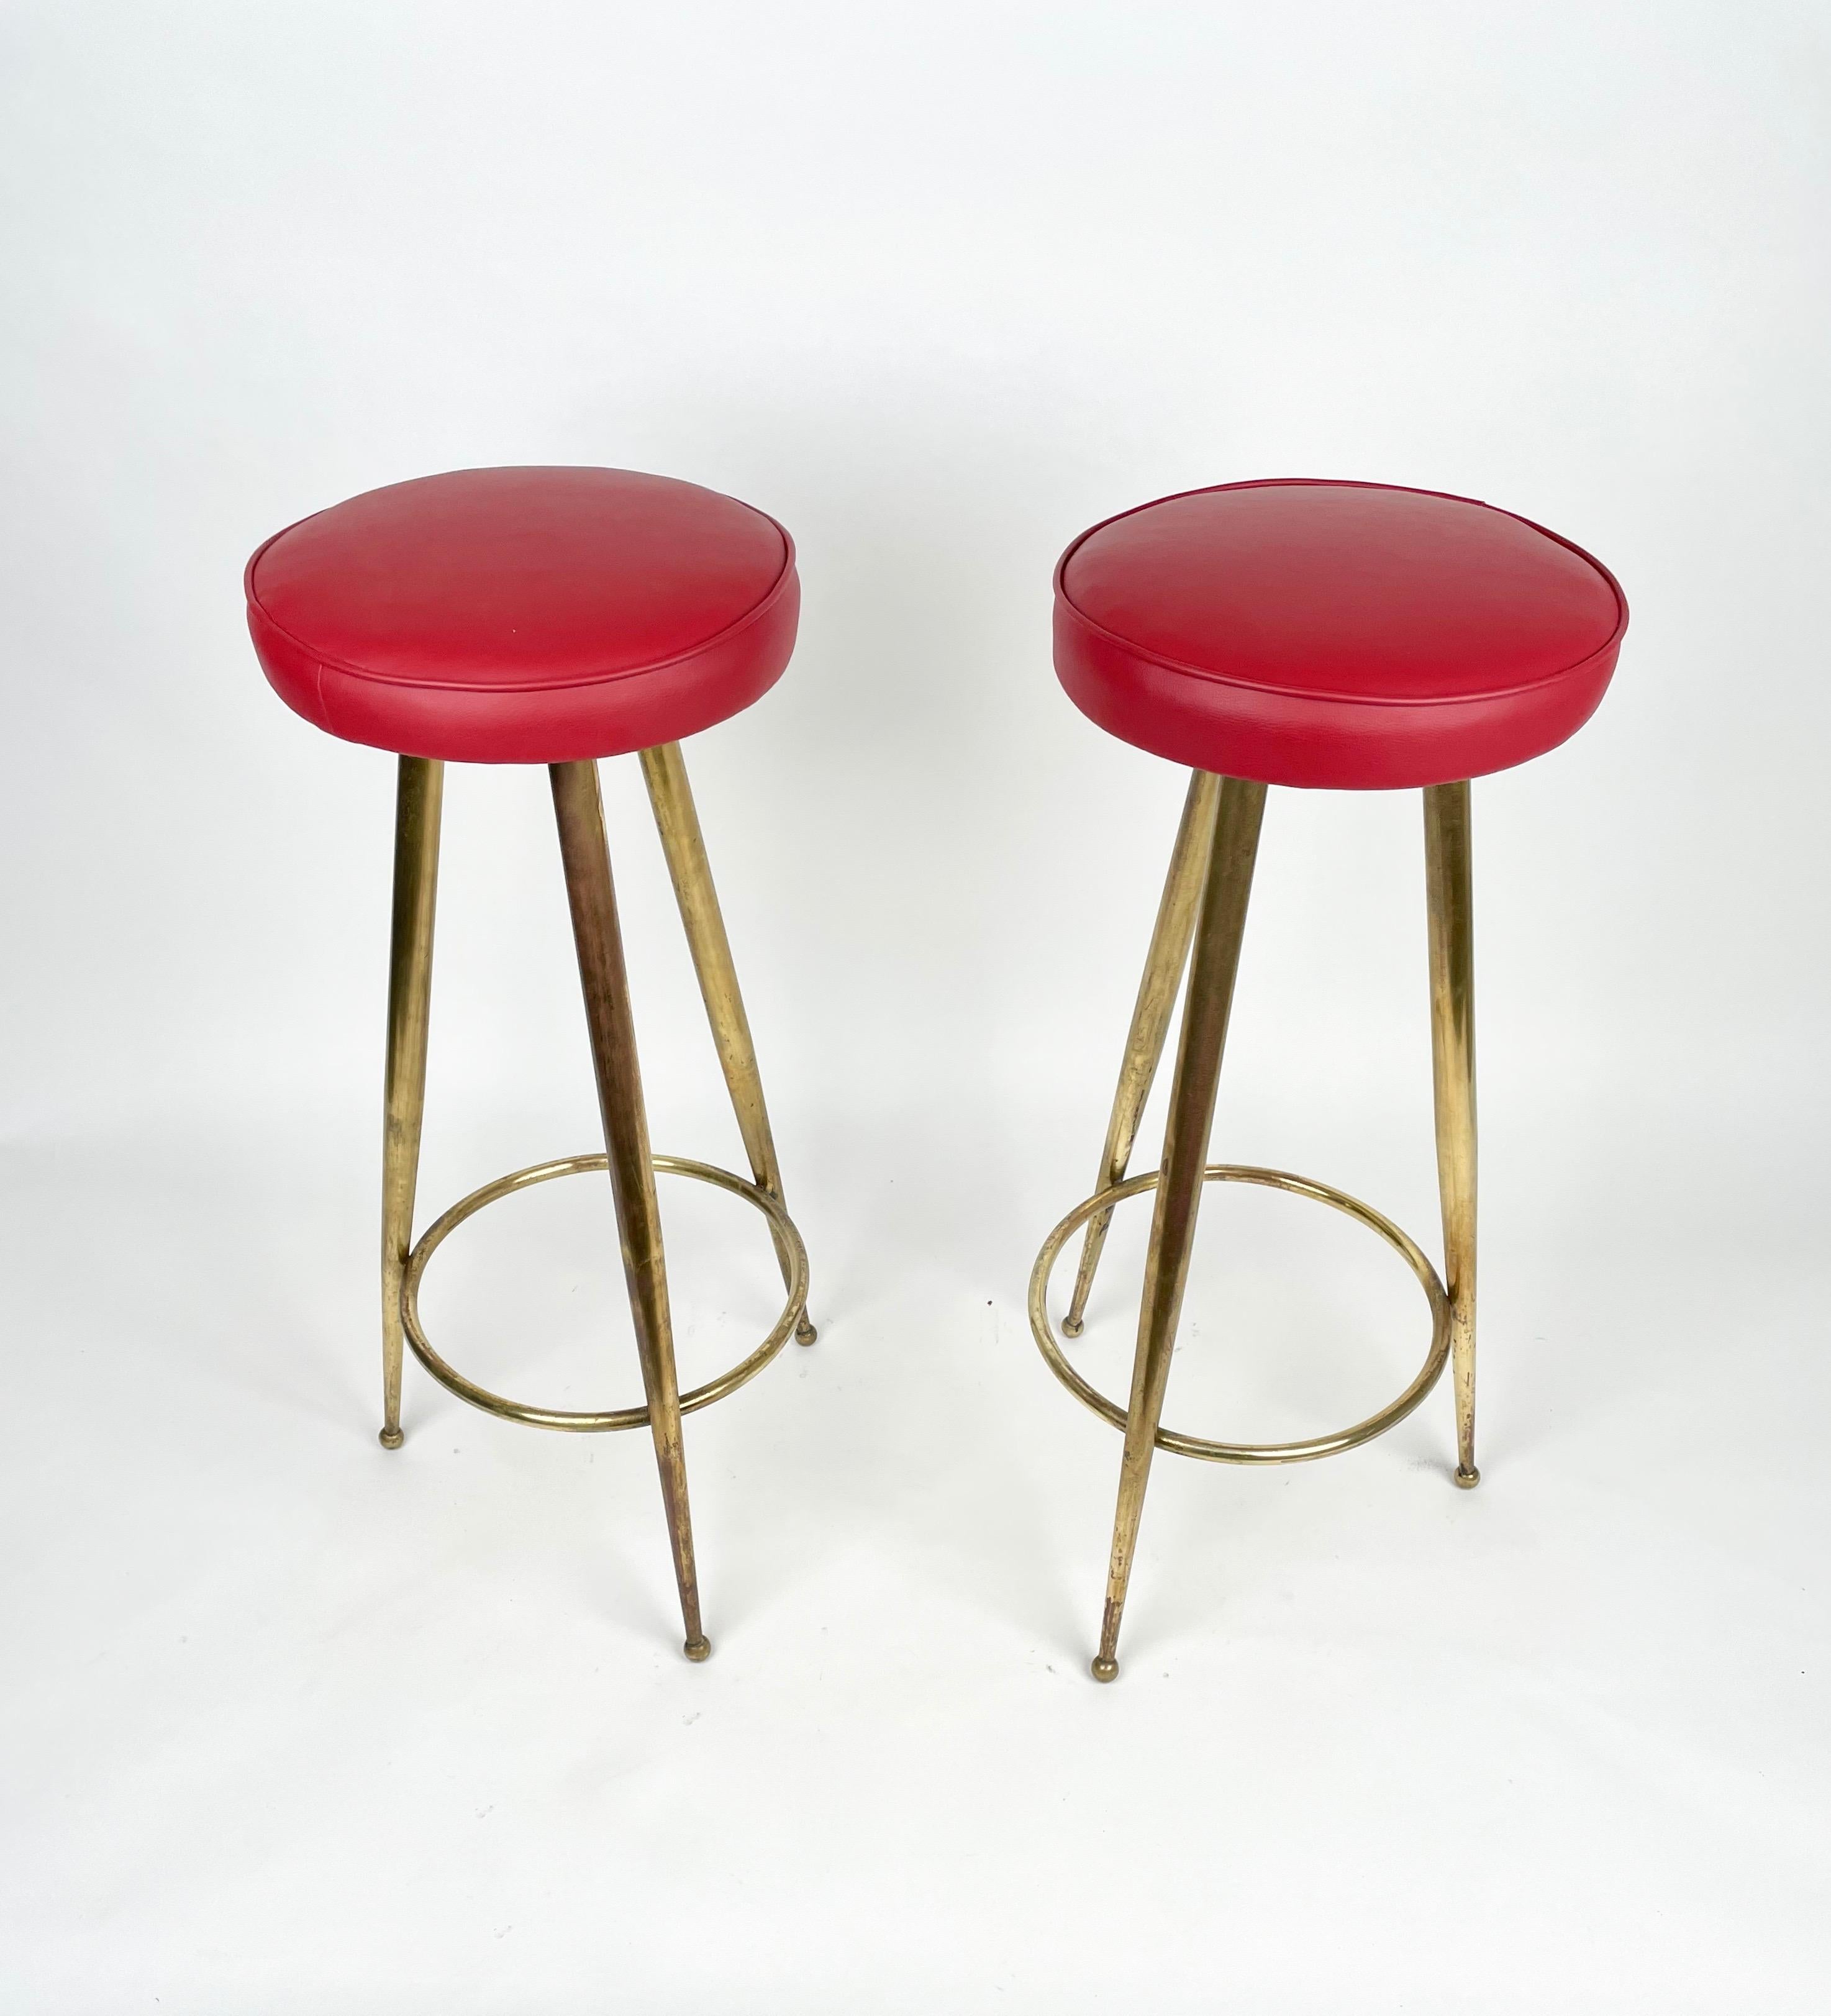 Magnificent pair of Mid-Century Modern bar stool in red vinyl and brass structure. This wonderful set was designed in Italy during the 1950s in the style of Gio Ponti.

These pair of bar stools were constructed with three solid brass tapered legs